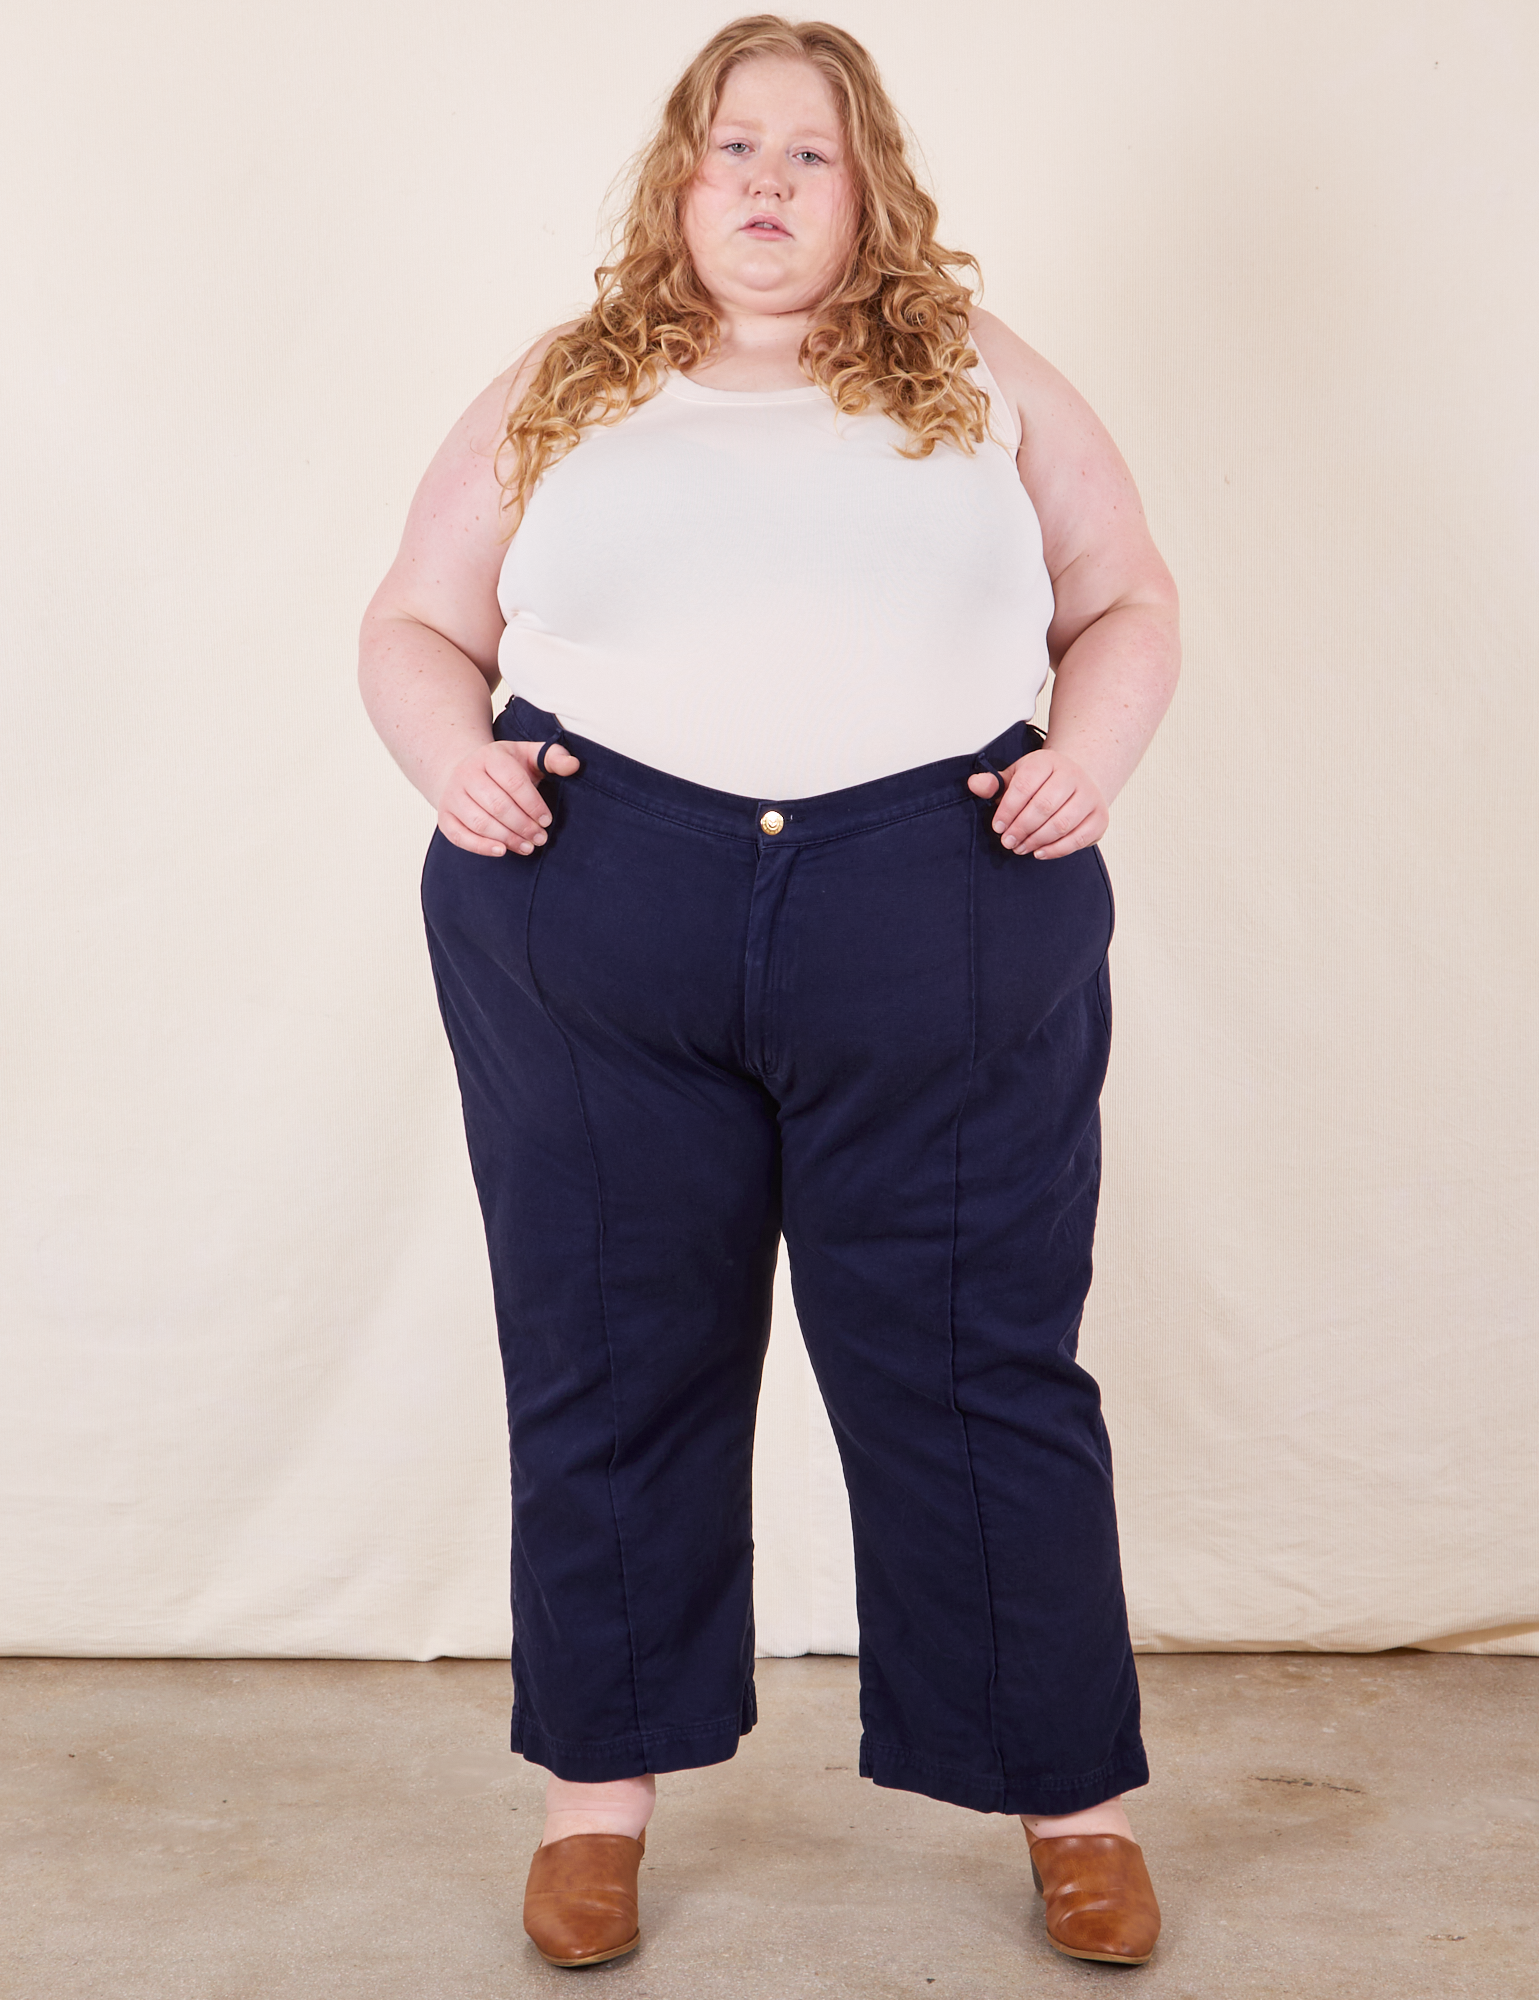 Catie is 5&#39;11&quot; and wearing 5XL Western Pants in Navy Blue paired with vintage off-white Tank Top